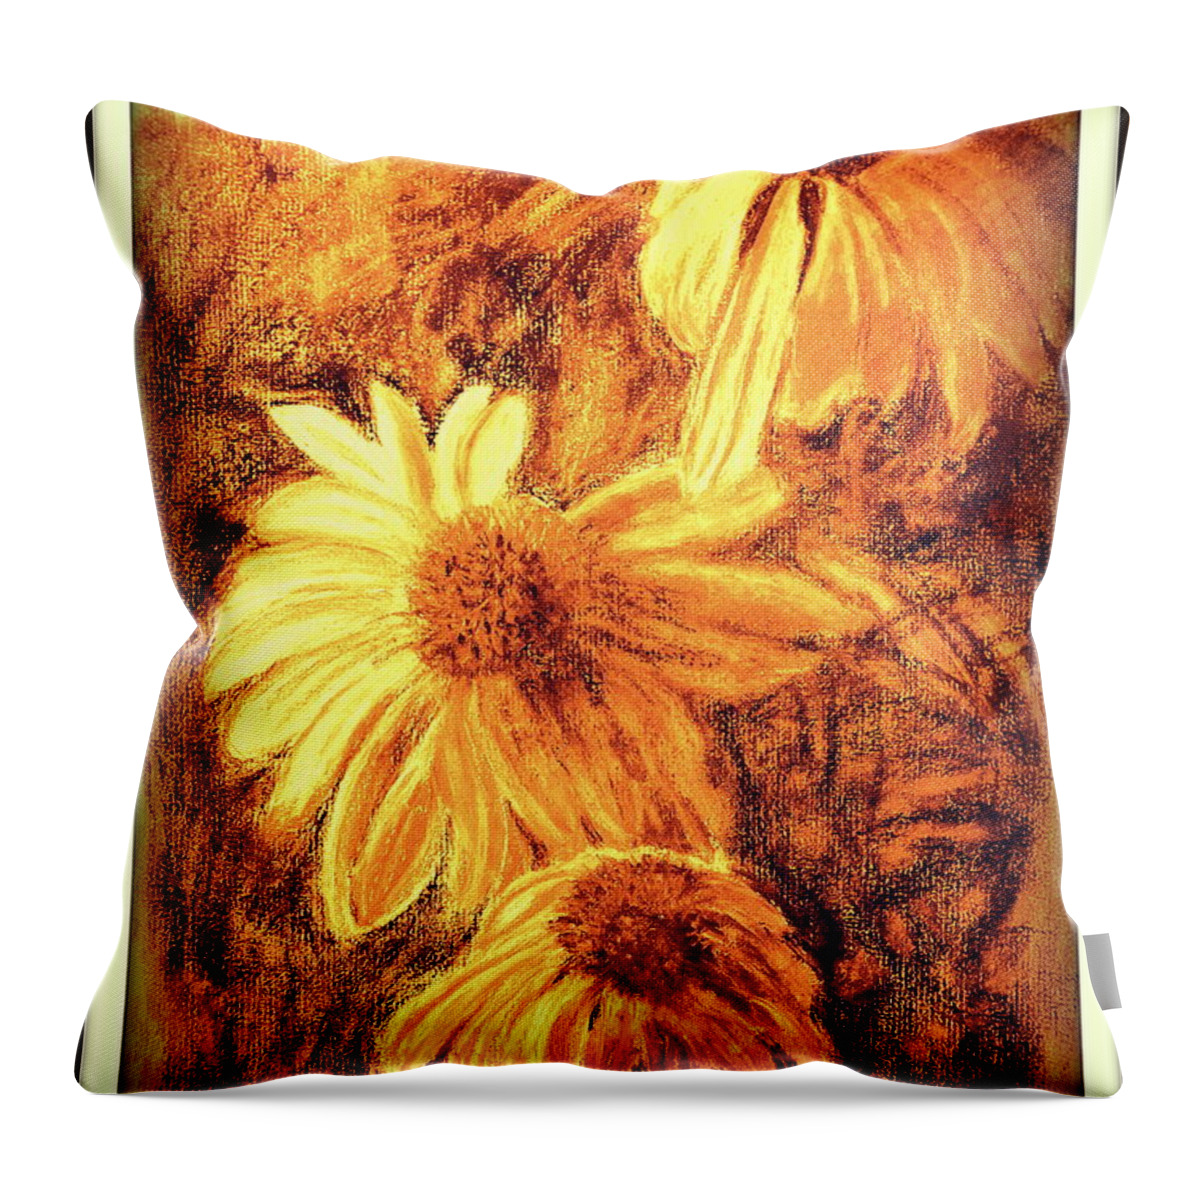 Flowers Throw Pillow featuring the digital art Untitled by Antonia Citrino